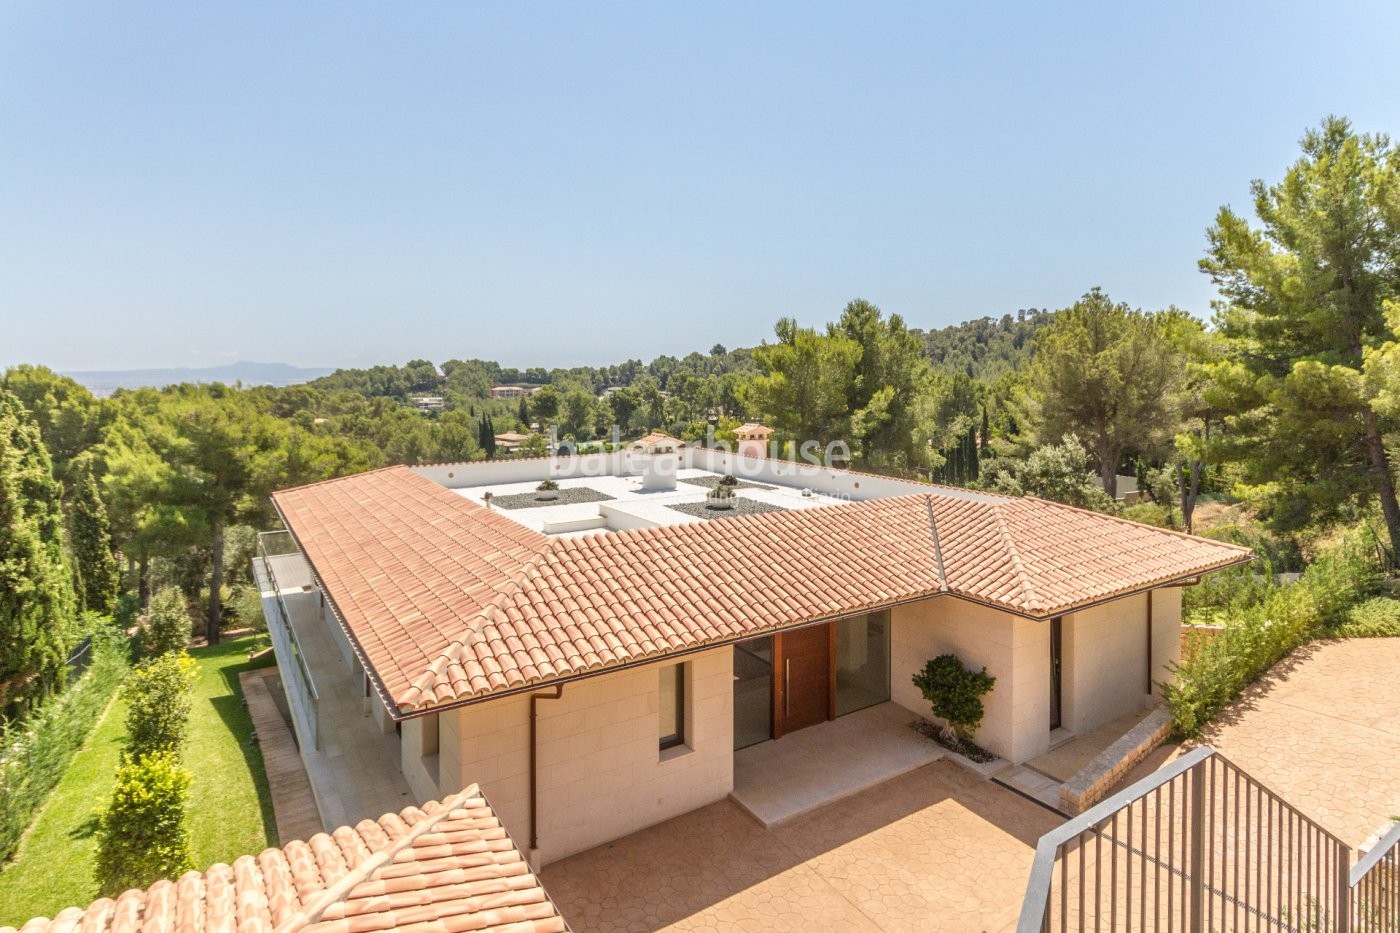 Excellent villa with swimming pool, terraces and beautiful views in the exclusive area of Son Vida.